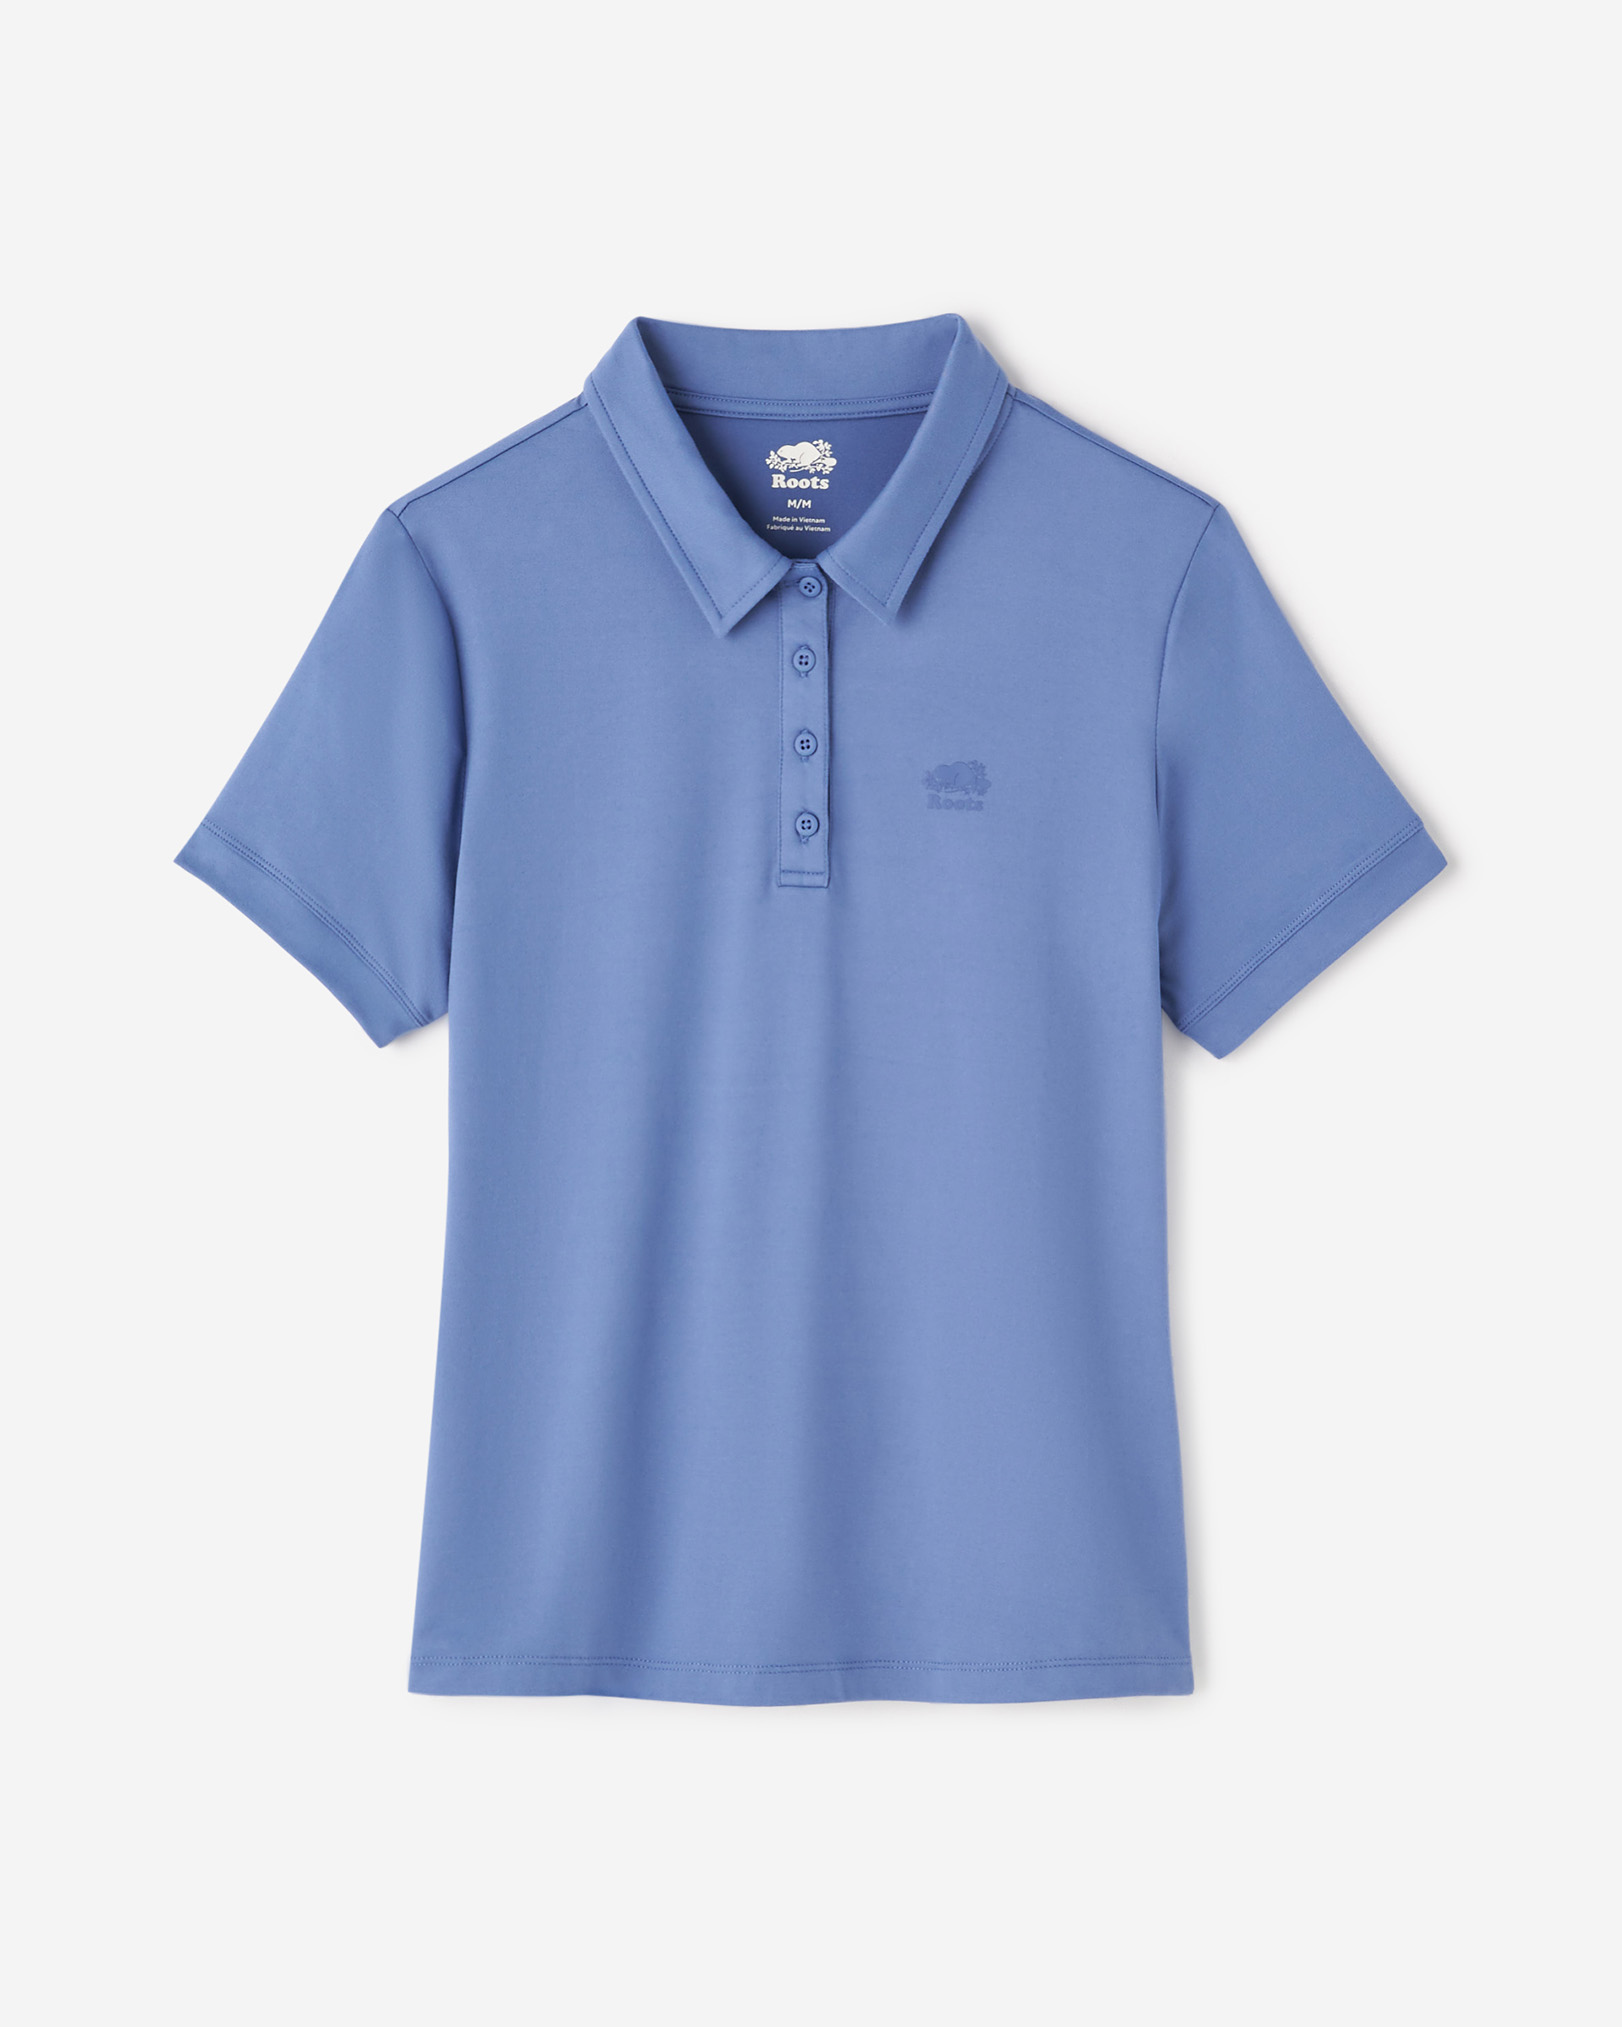 Roots Renew Short Sleeve Polo T-Shirt in Blue Horizon